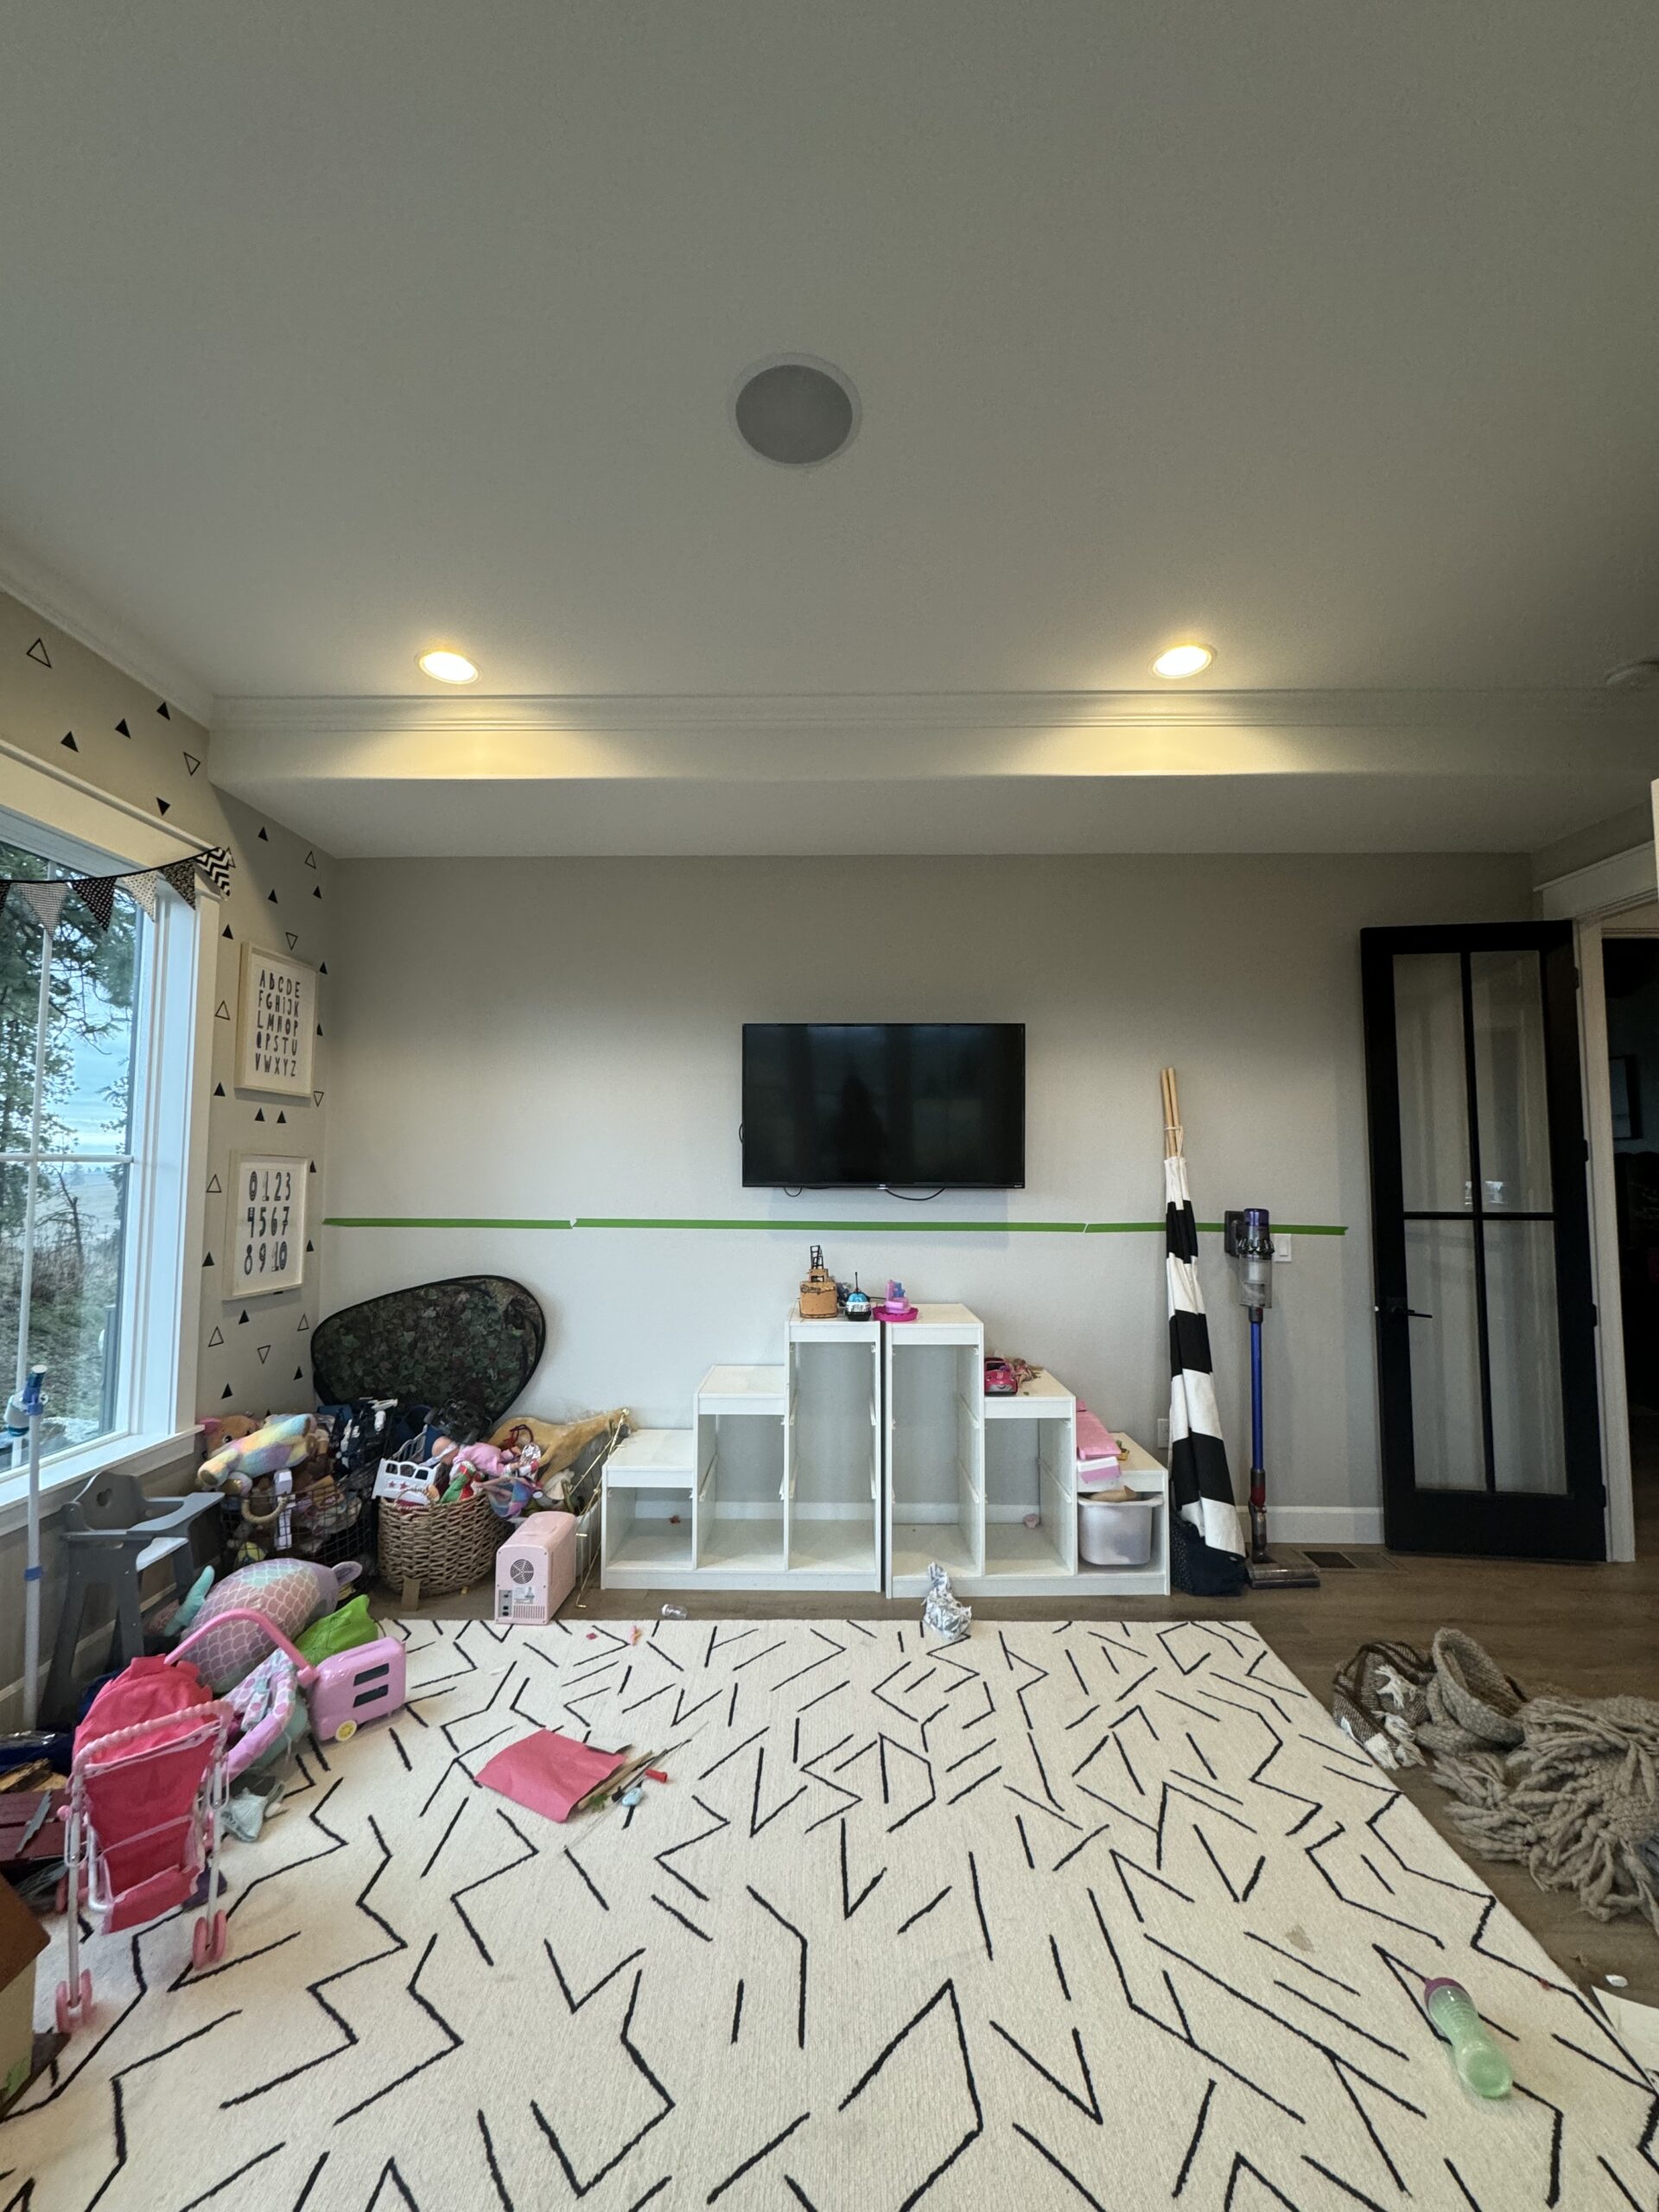 before and after a stunning playroom transformation | playroom, playroom transformation, home, home project, room refresh